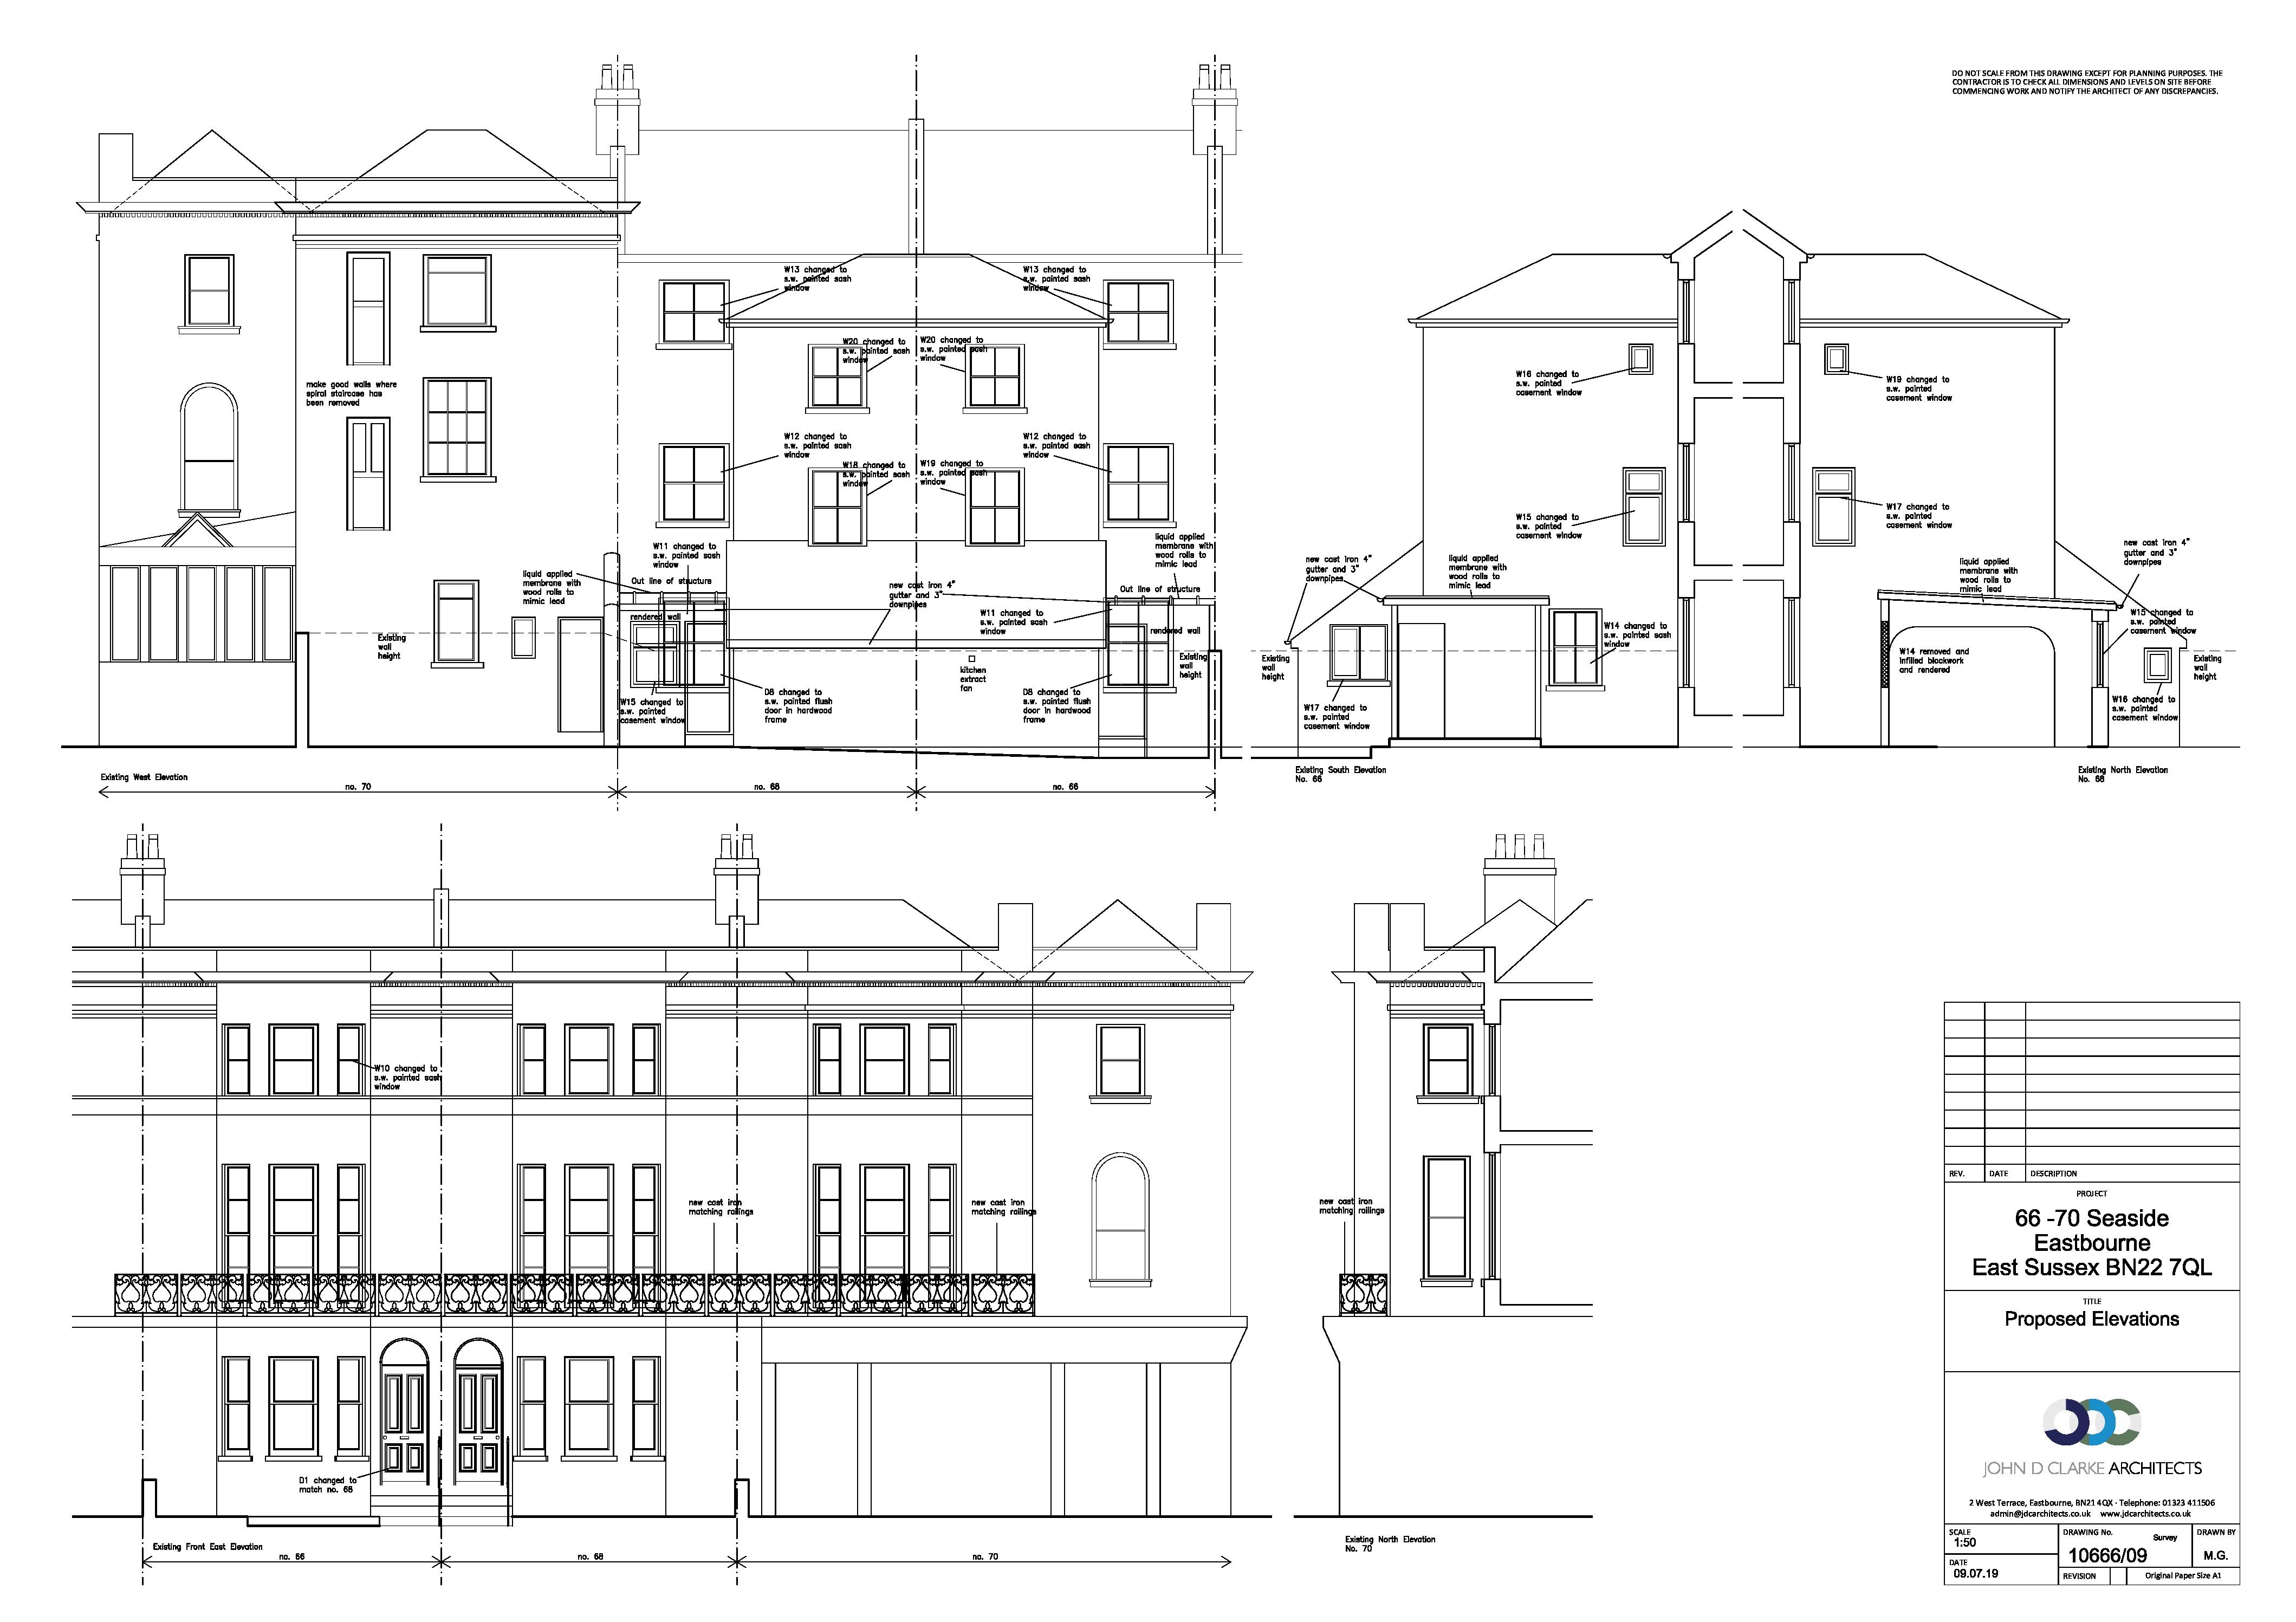 09 Proposed Elevations (2)